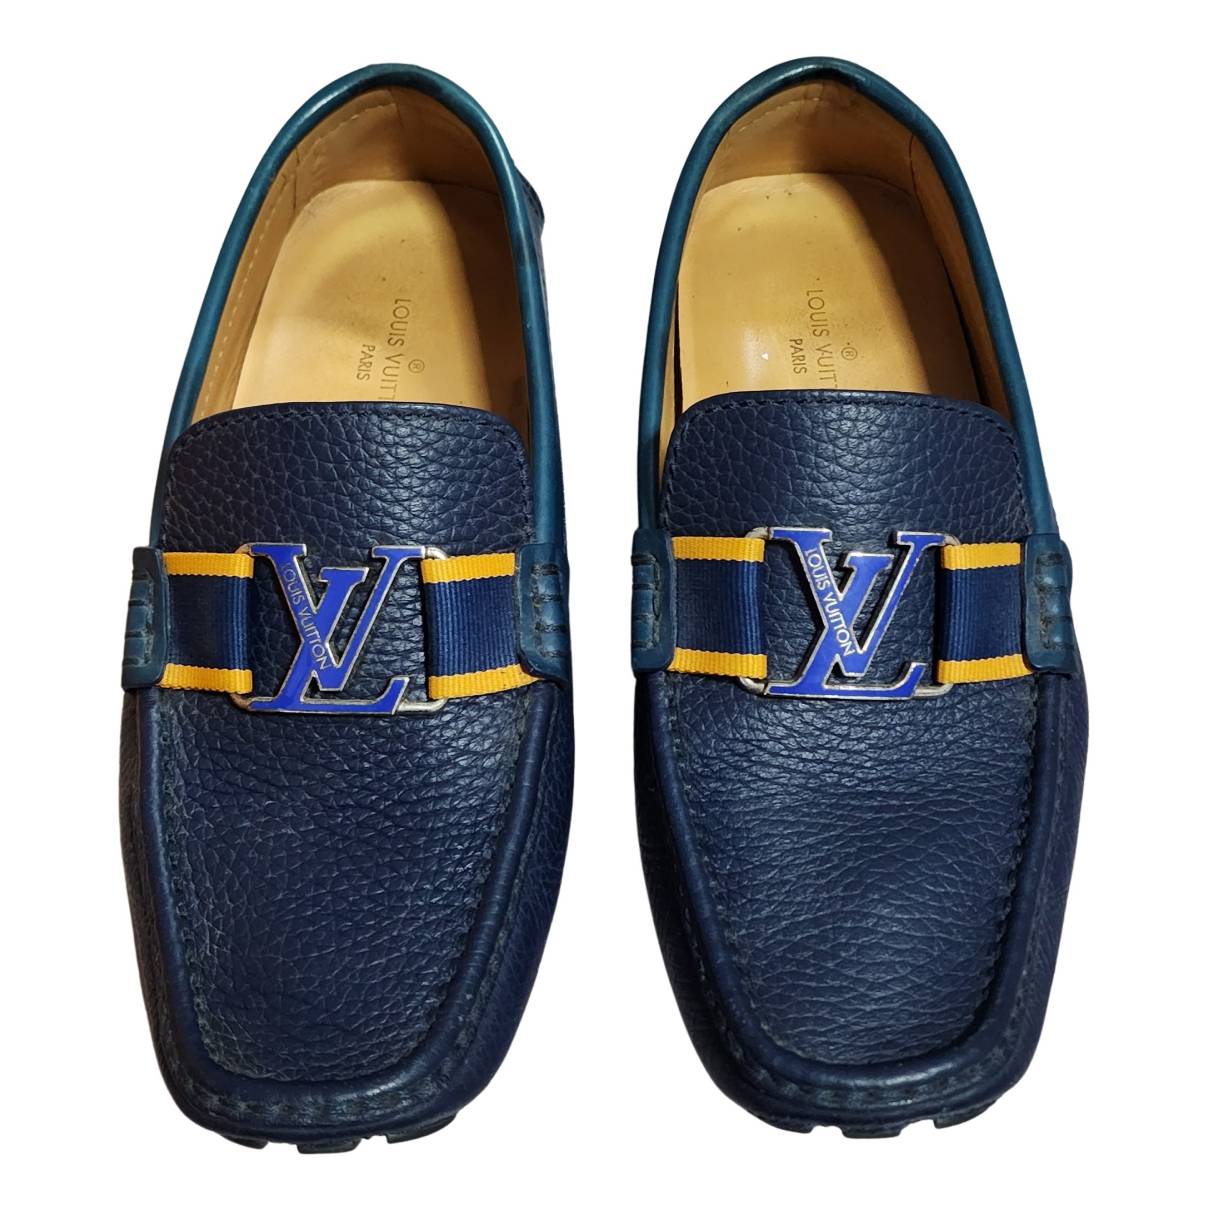 Monte carlo leather flats Louis Vuitton Blue size 6.5 UK in Leather -  29721852